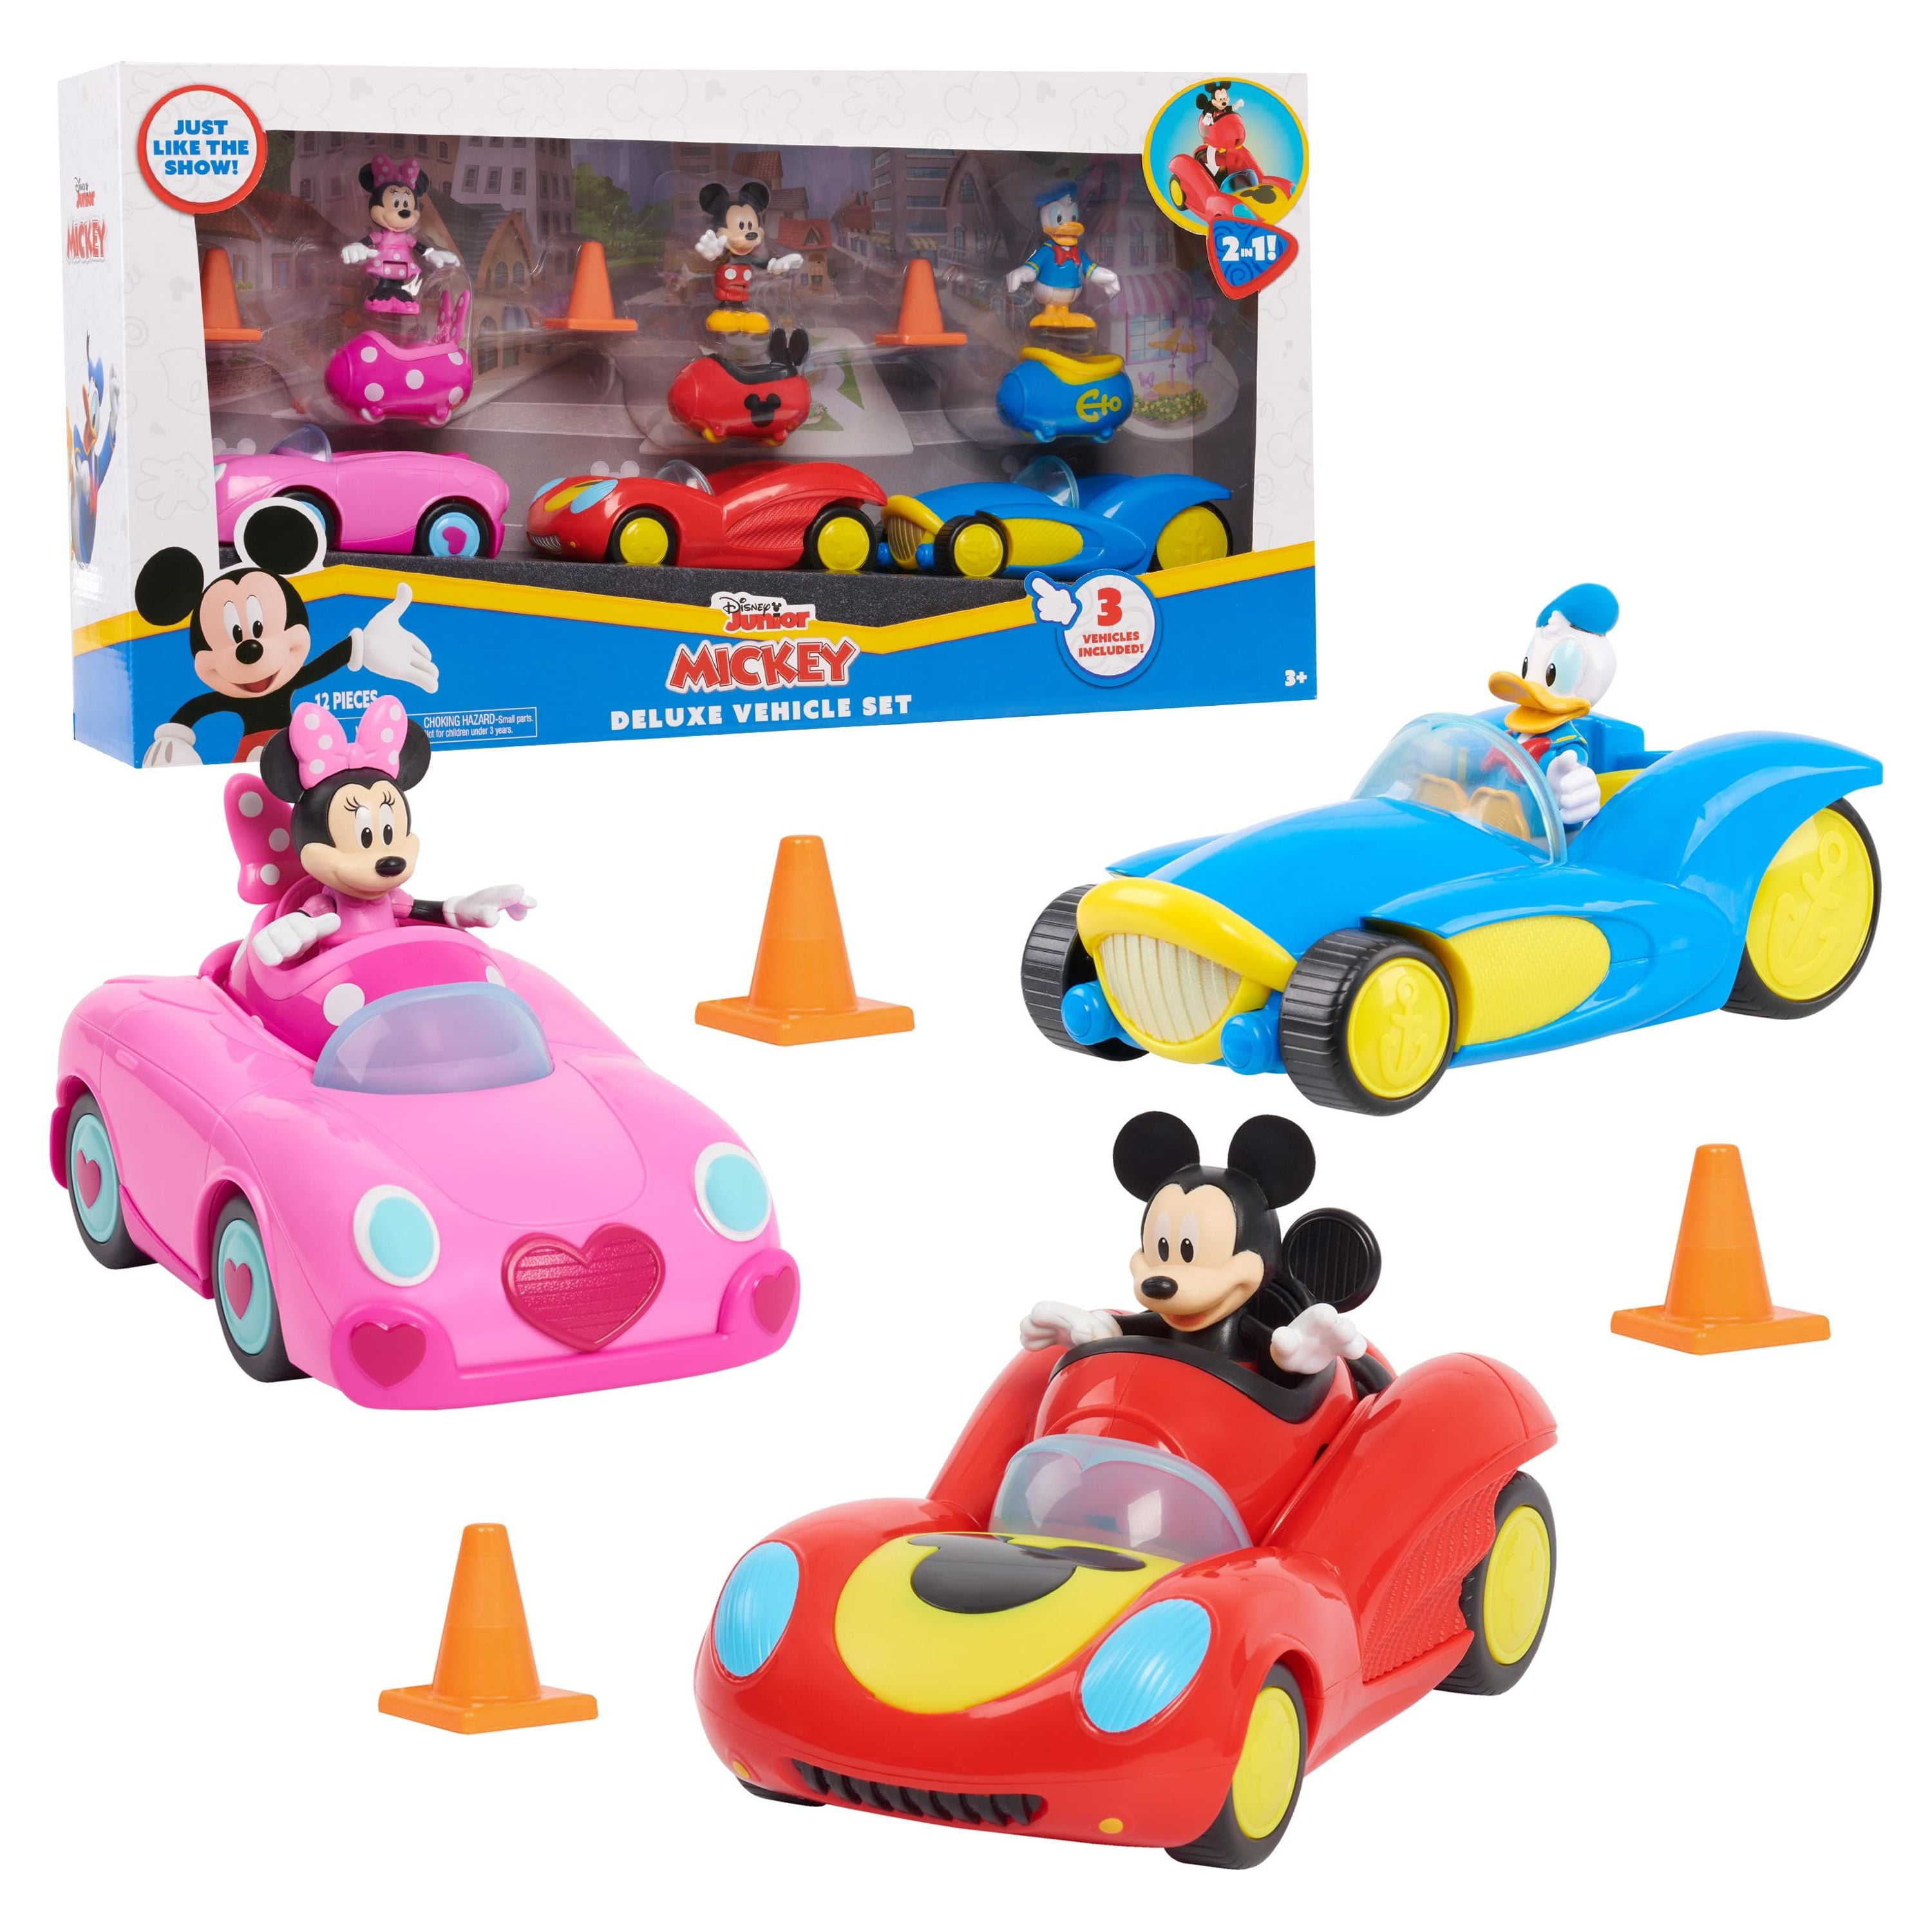 Disney Junior Minnie Mouse 7-Piece Figure Set, Kids Toys for Ages 3 Up, Size: 11.75 inches; 2.0 inches; 6.0 Inches